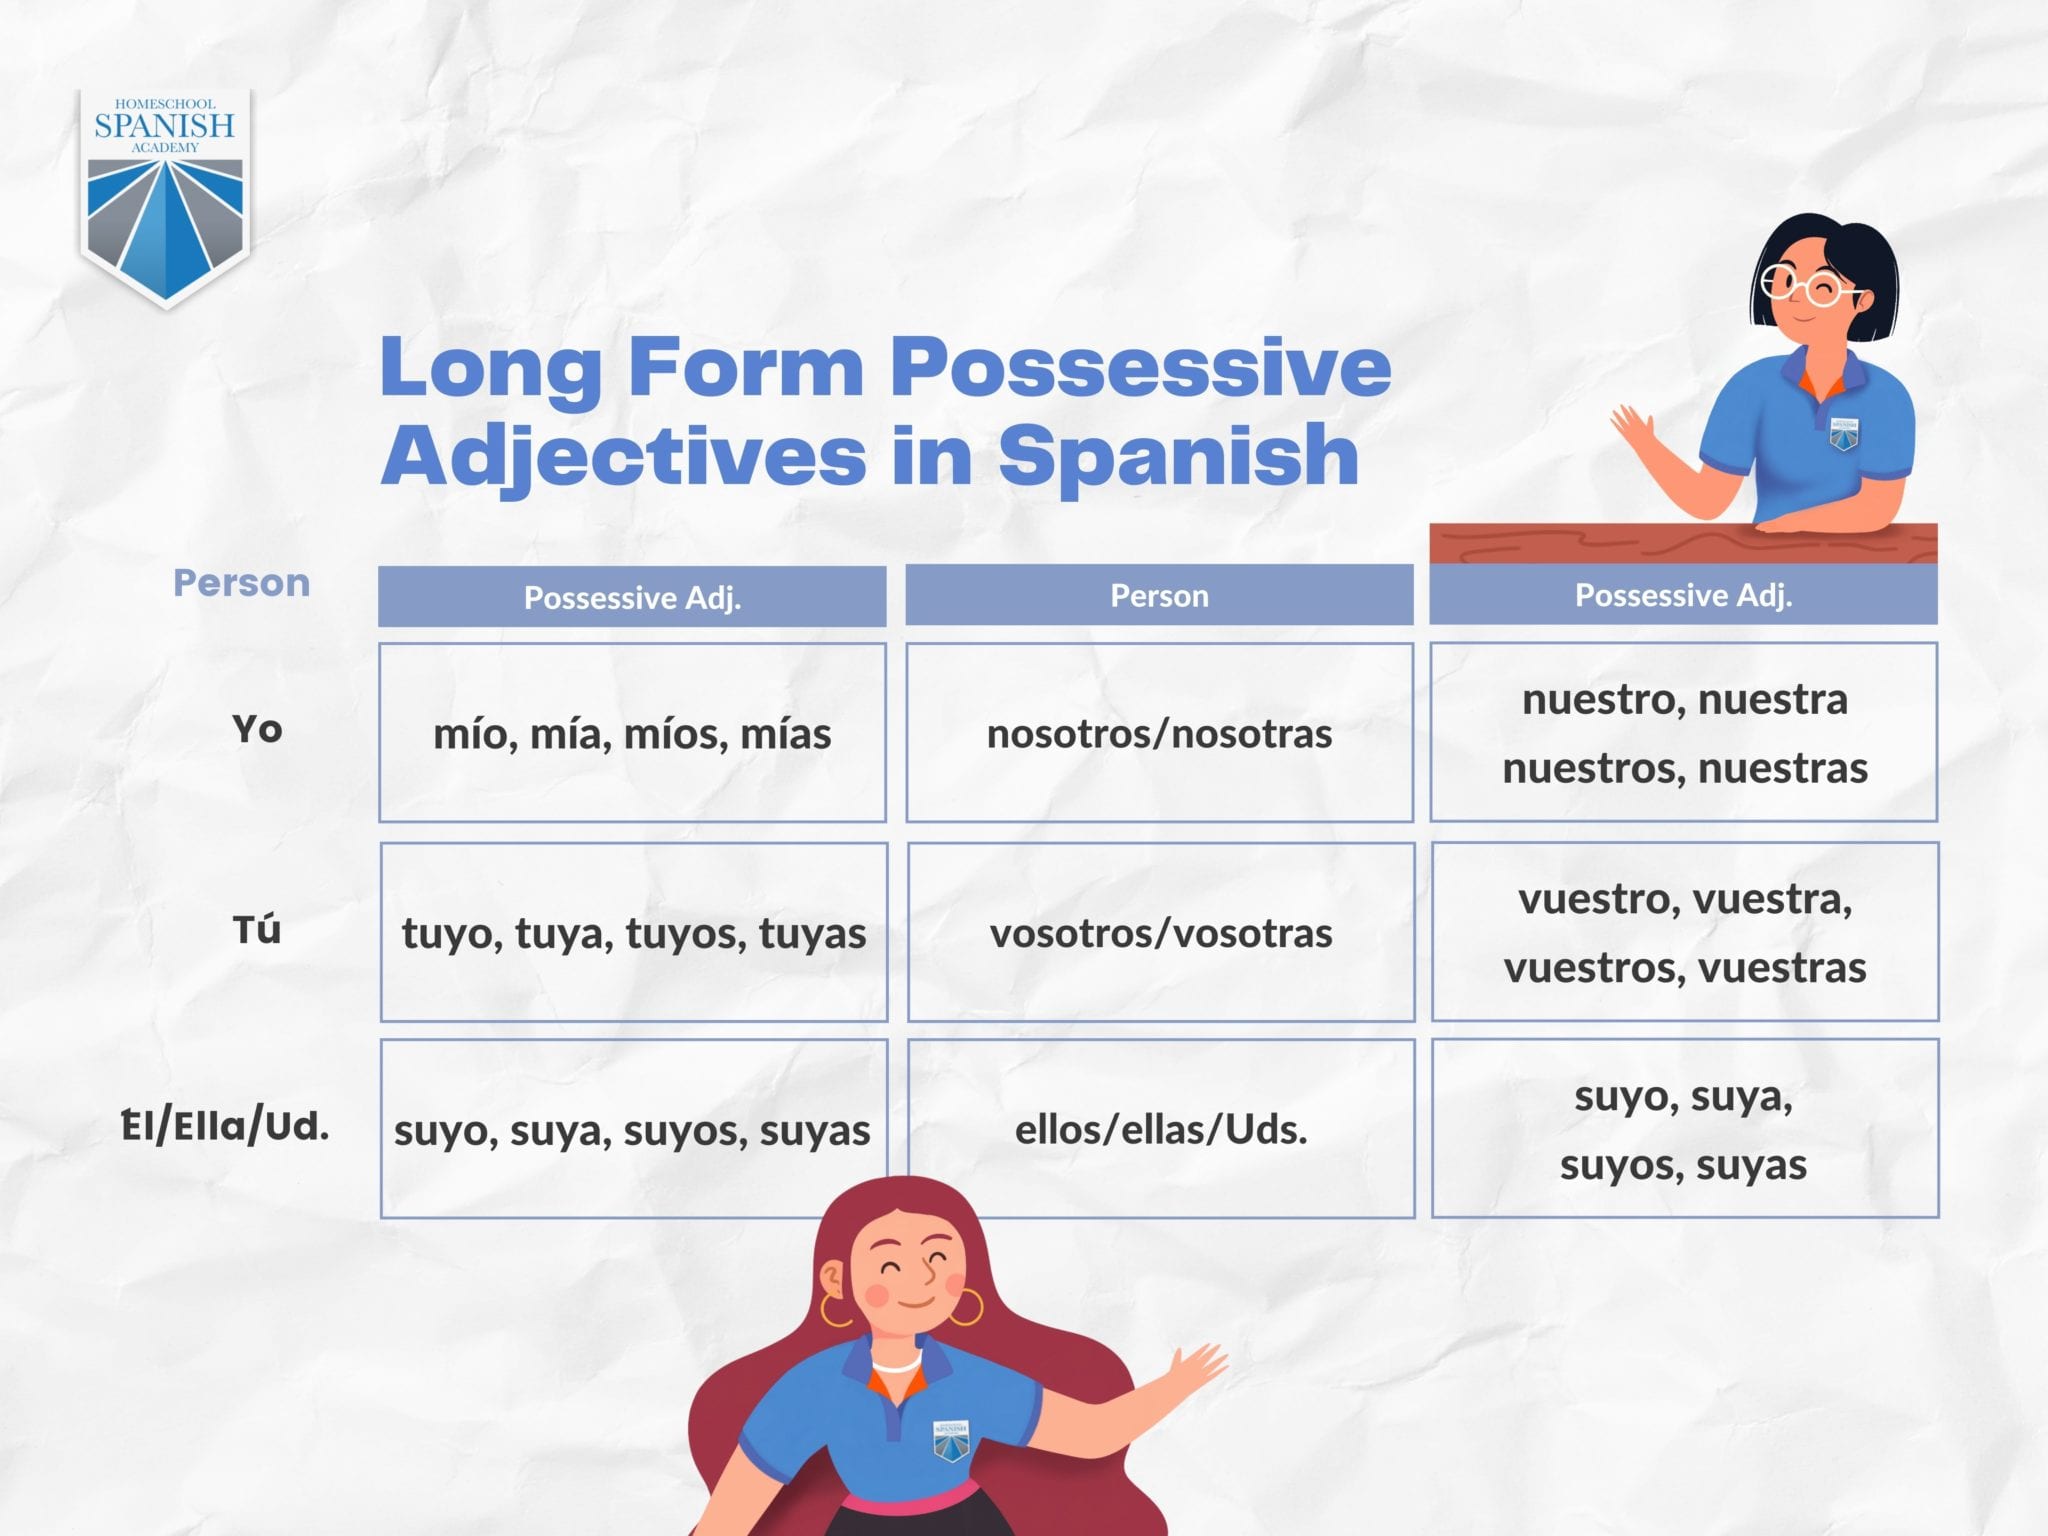 a-simple-guide-to-possessive-adjectives-in-spanish